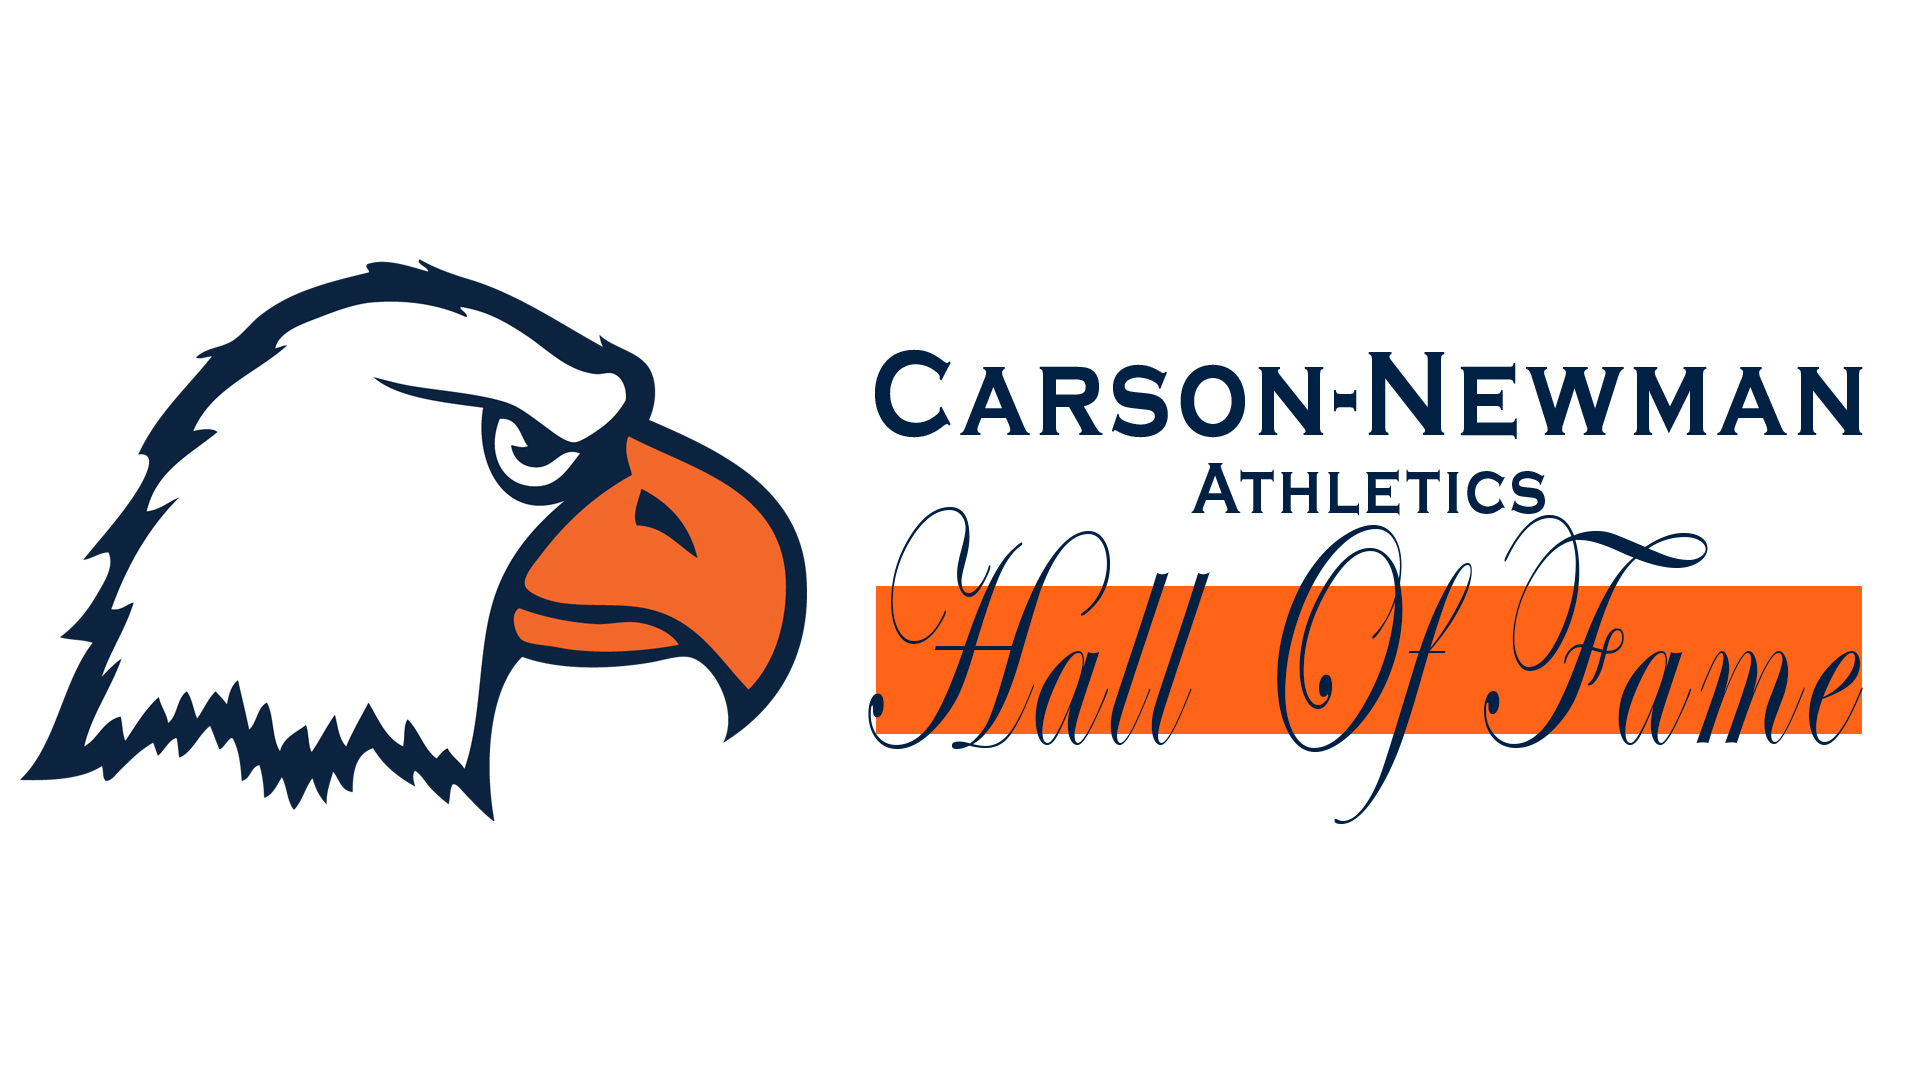 Nine finalists unveiled for 2025 Carson-Newman Athletics Hall of Fame Class, voting open